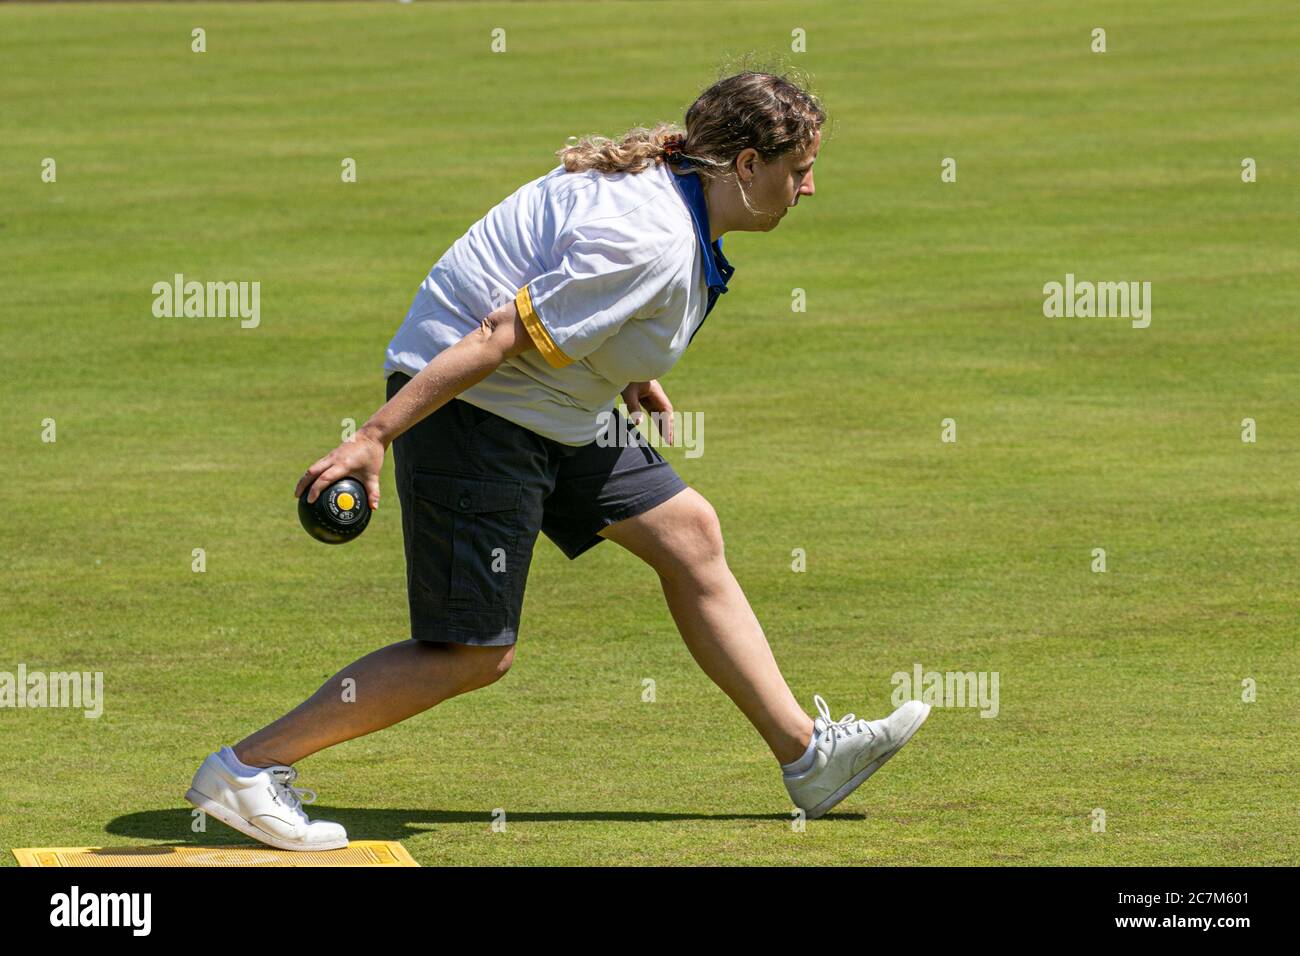 WIMBLEDON LONDON UK. 18th July, 2020. Lawn bowlers from the Wimbledon Park Bowls Club enjoy bowling outdoors on a hot summer day as lockdown restrictions are lifted and sport facilities reopen.Credit: amer ghazzal/Alamy Live News Stock Photo